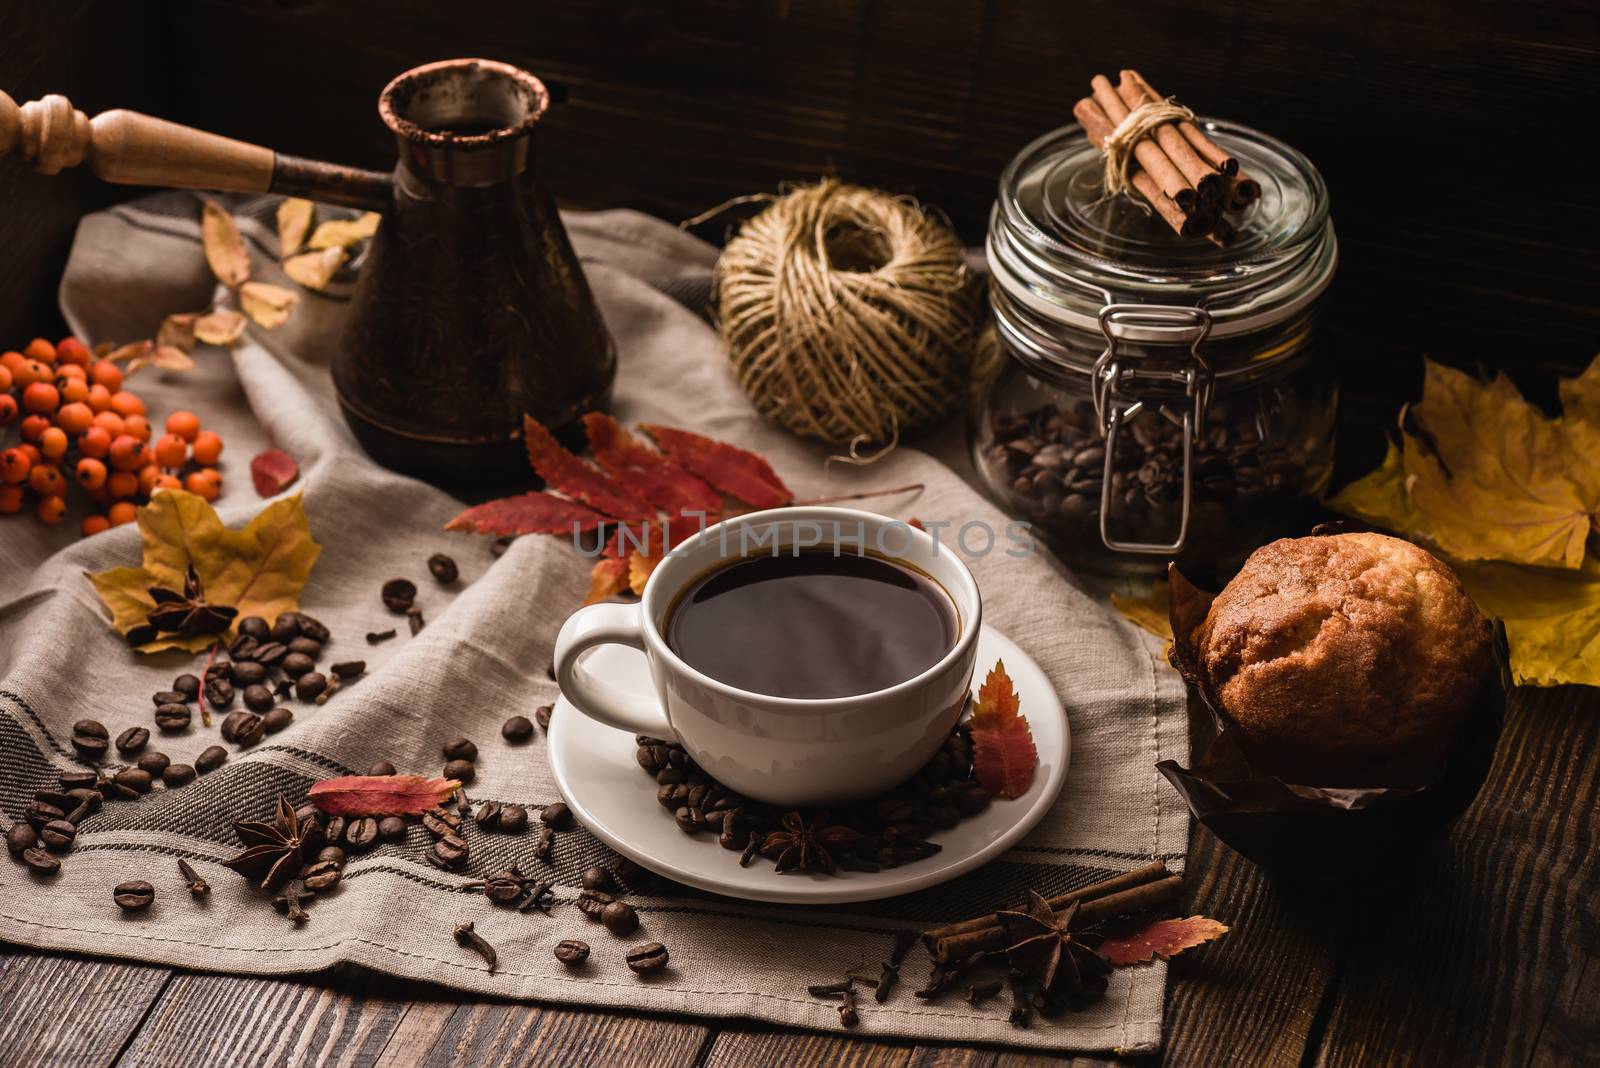 Autumn Leaves with Cup of Coffee and Muffin, Ingredients, Spices and Some Kitchenware on tablecloth.